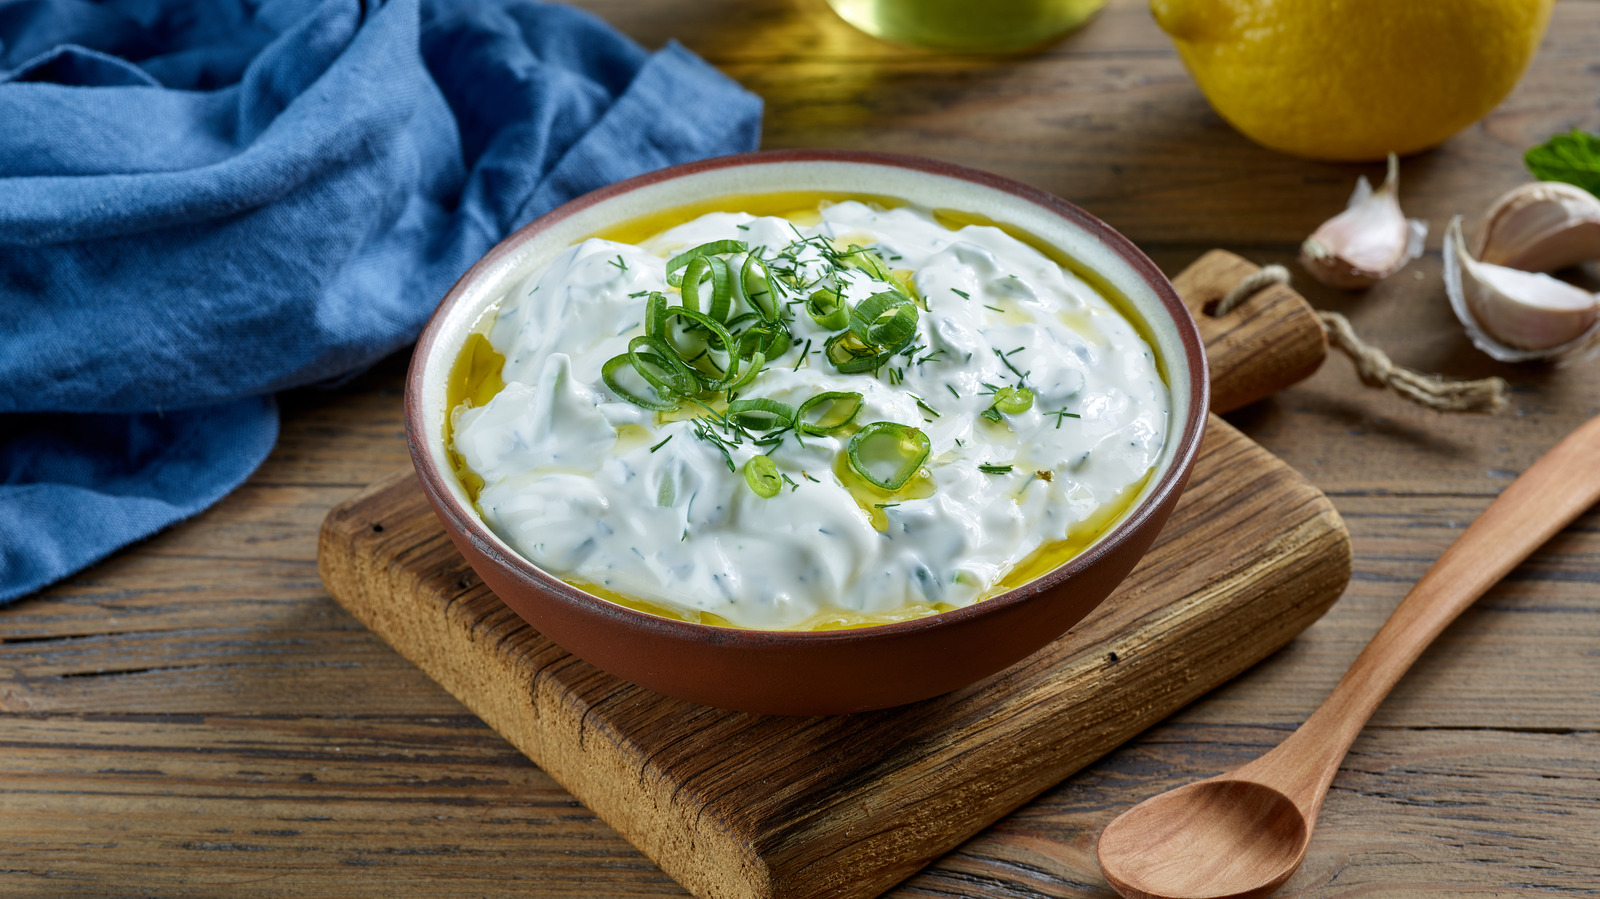 How Long Can Sour Cream Be Left Out At Room Temperature?